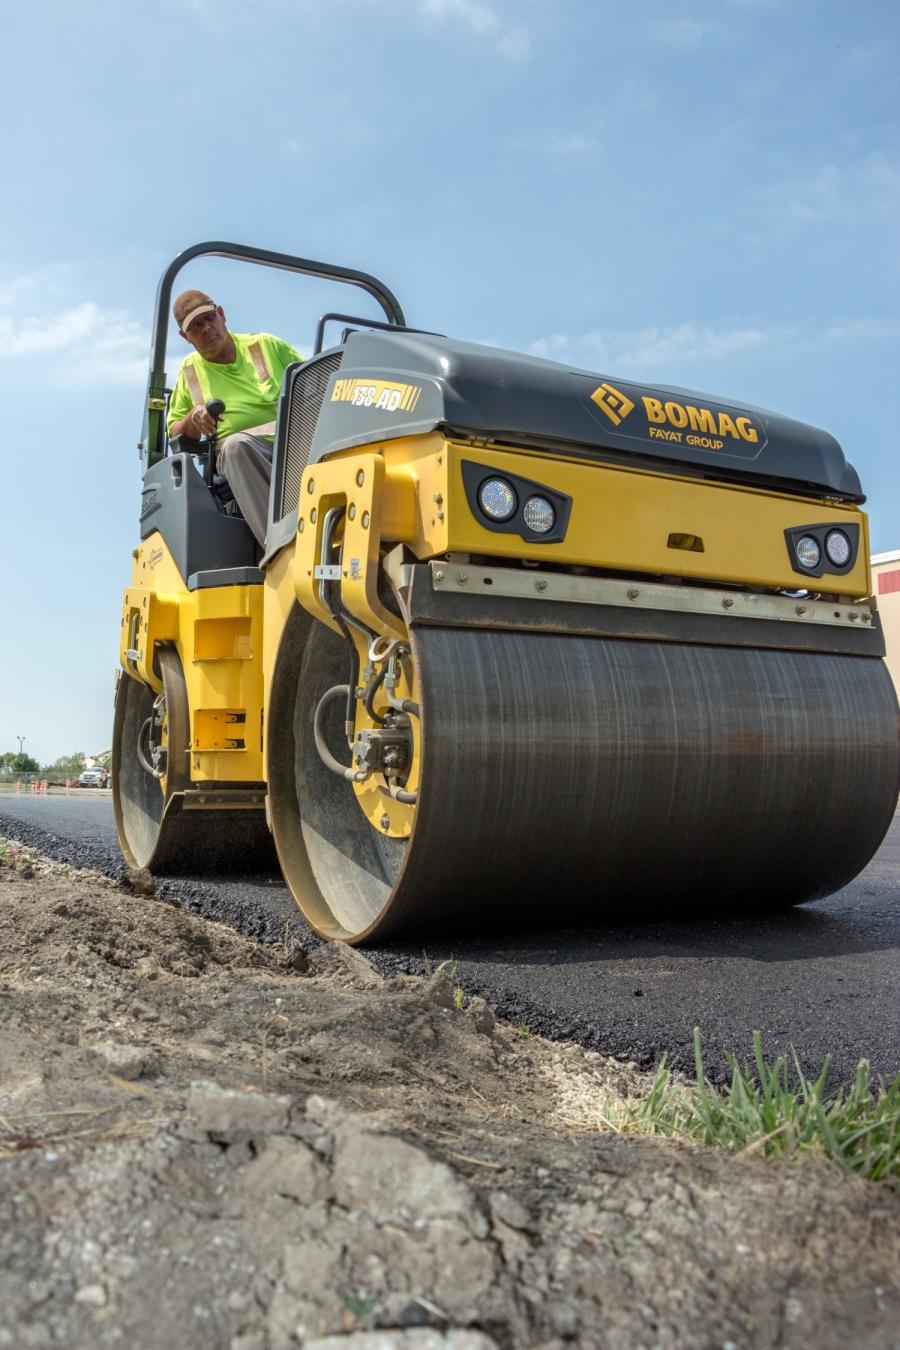 When equipped with the intuitive Economizer compaction measurement system, the BW 138 AD-5 alerts operators to compaction progress of the soil or asphalt material, reducing passes and saving time and money.